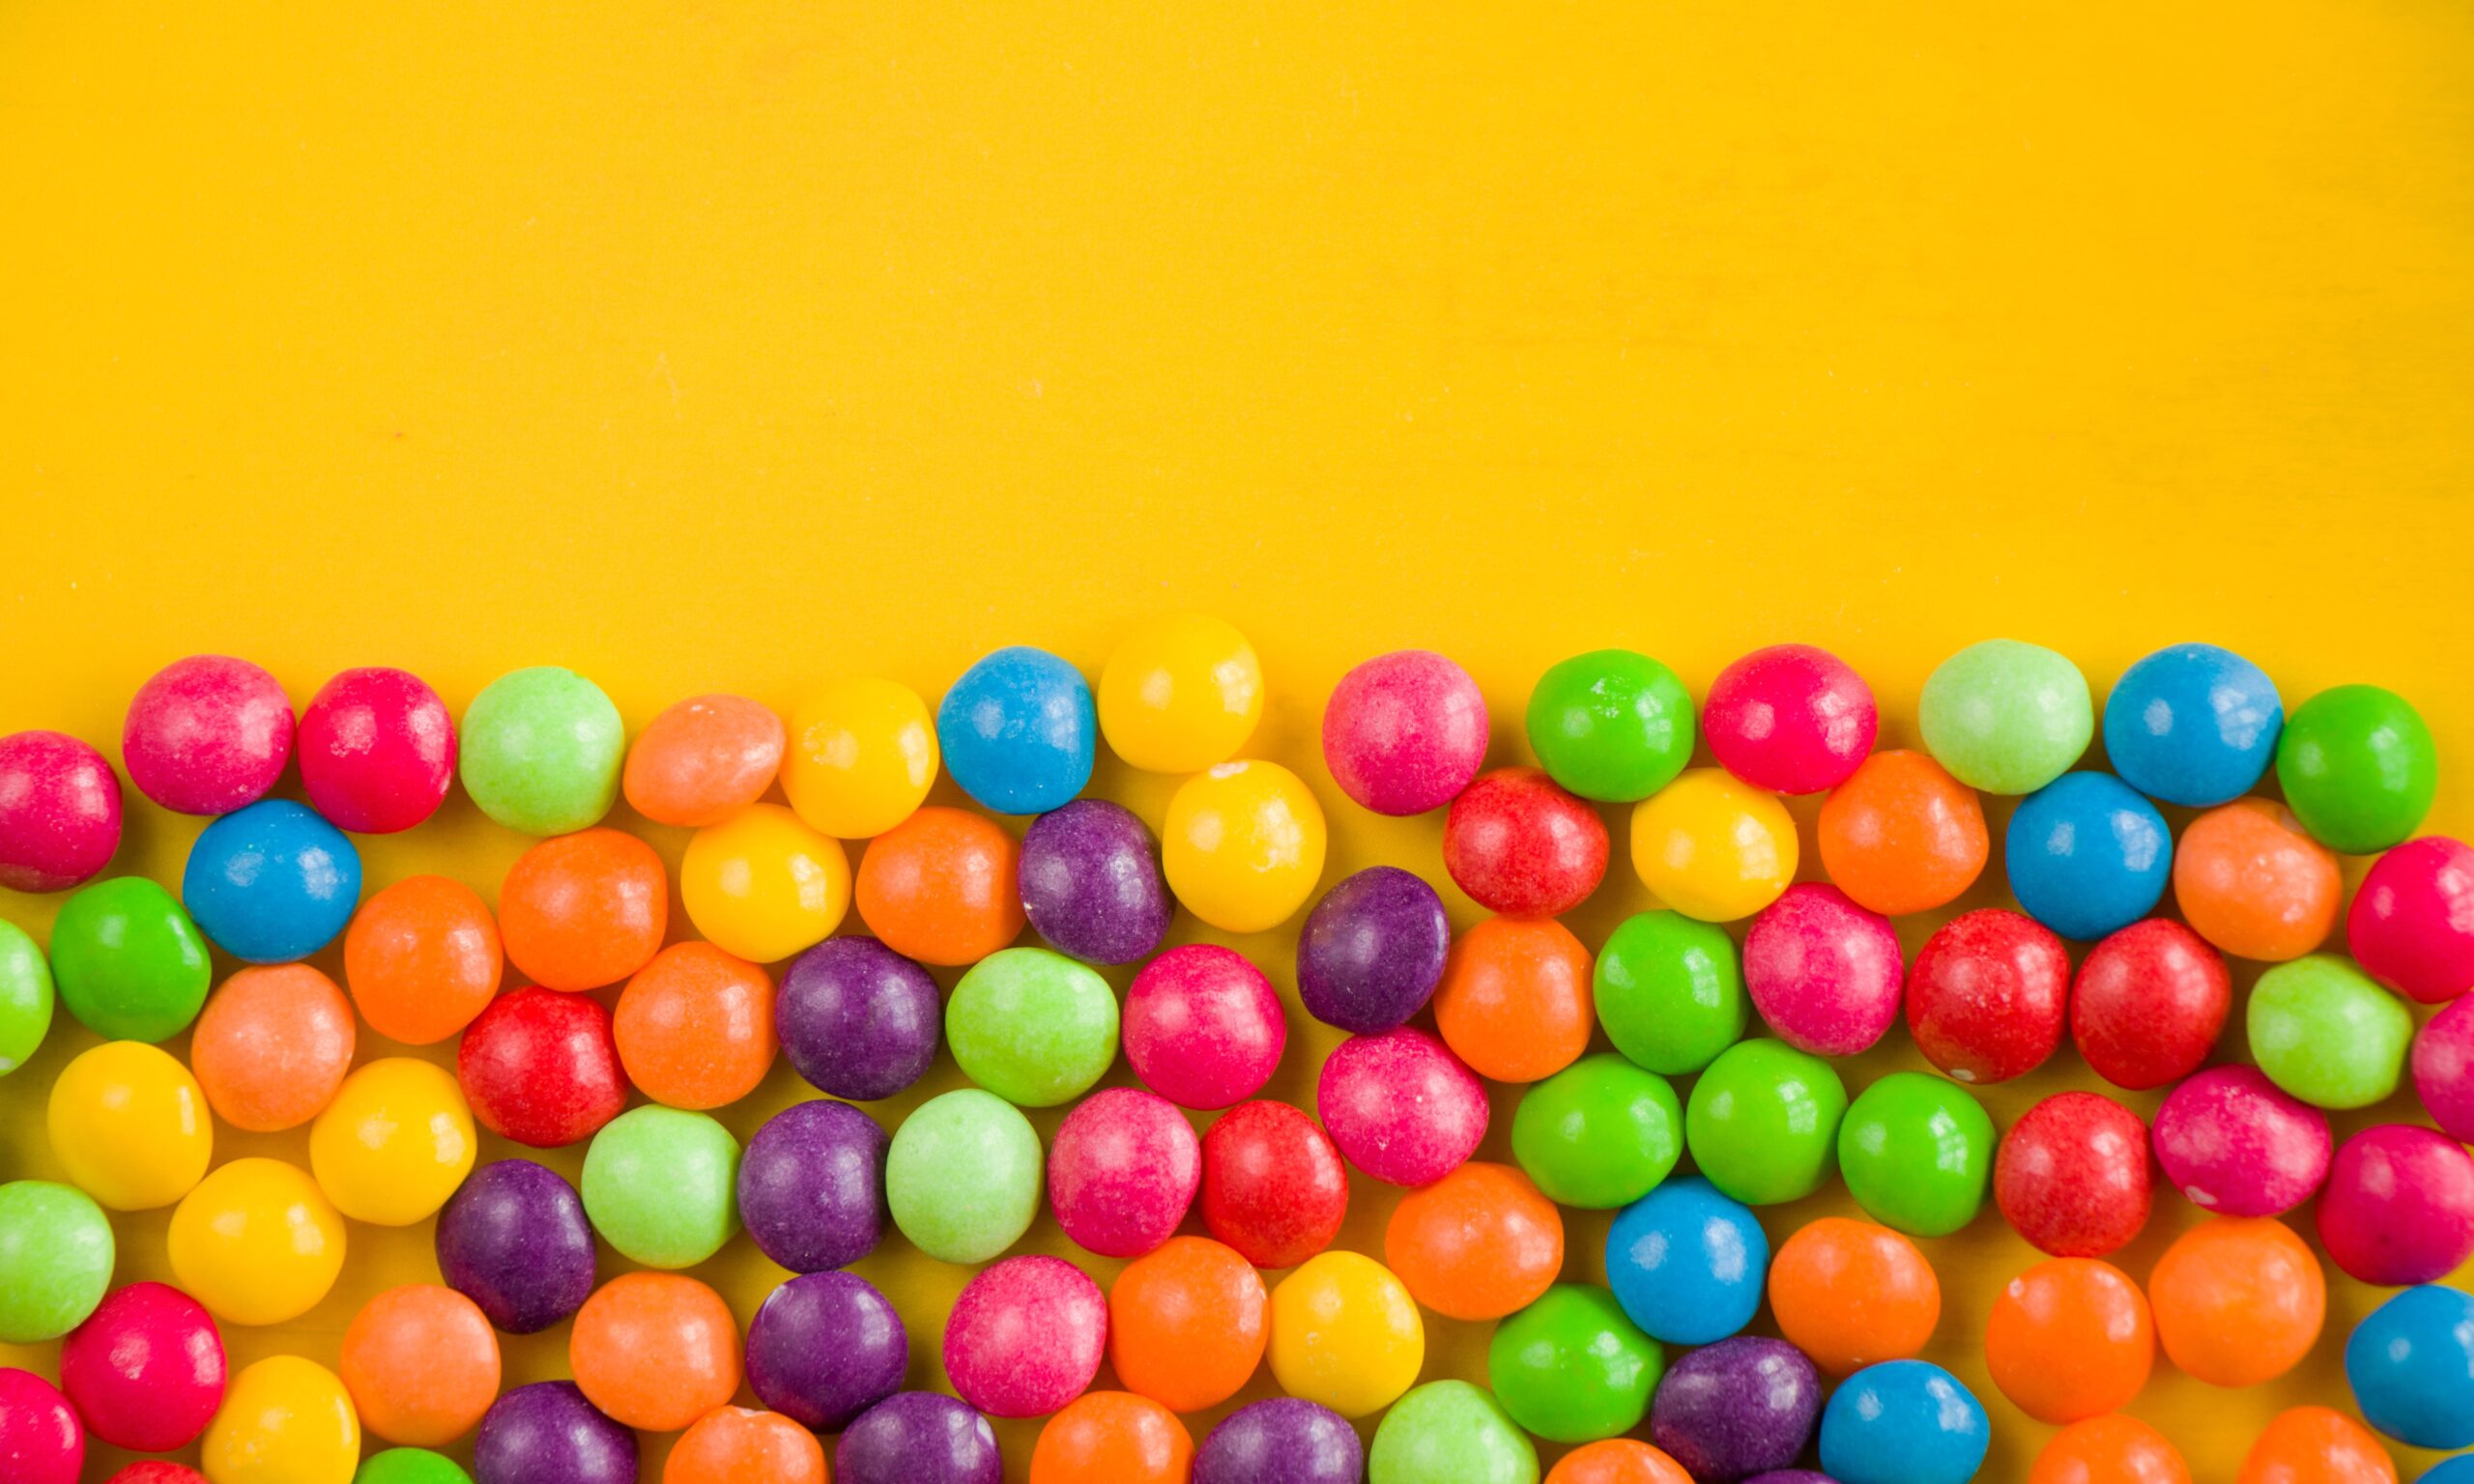 Fact Check: Are Skittles Banned in California?